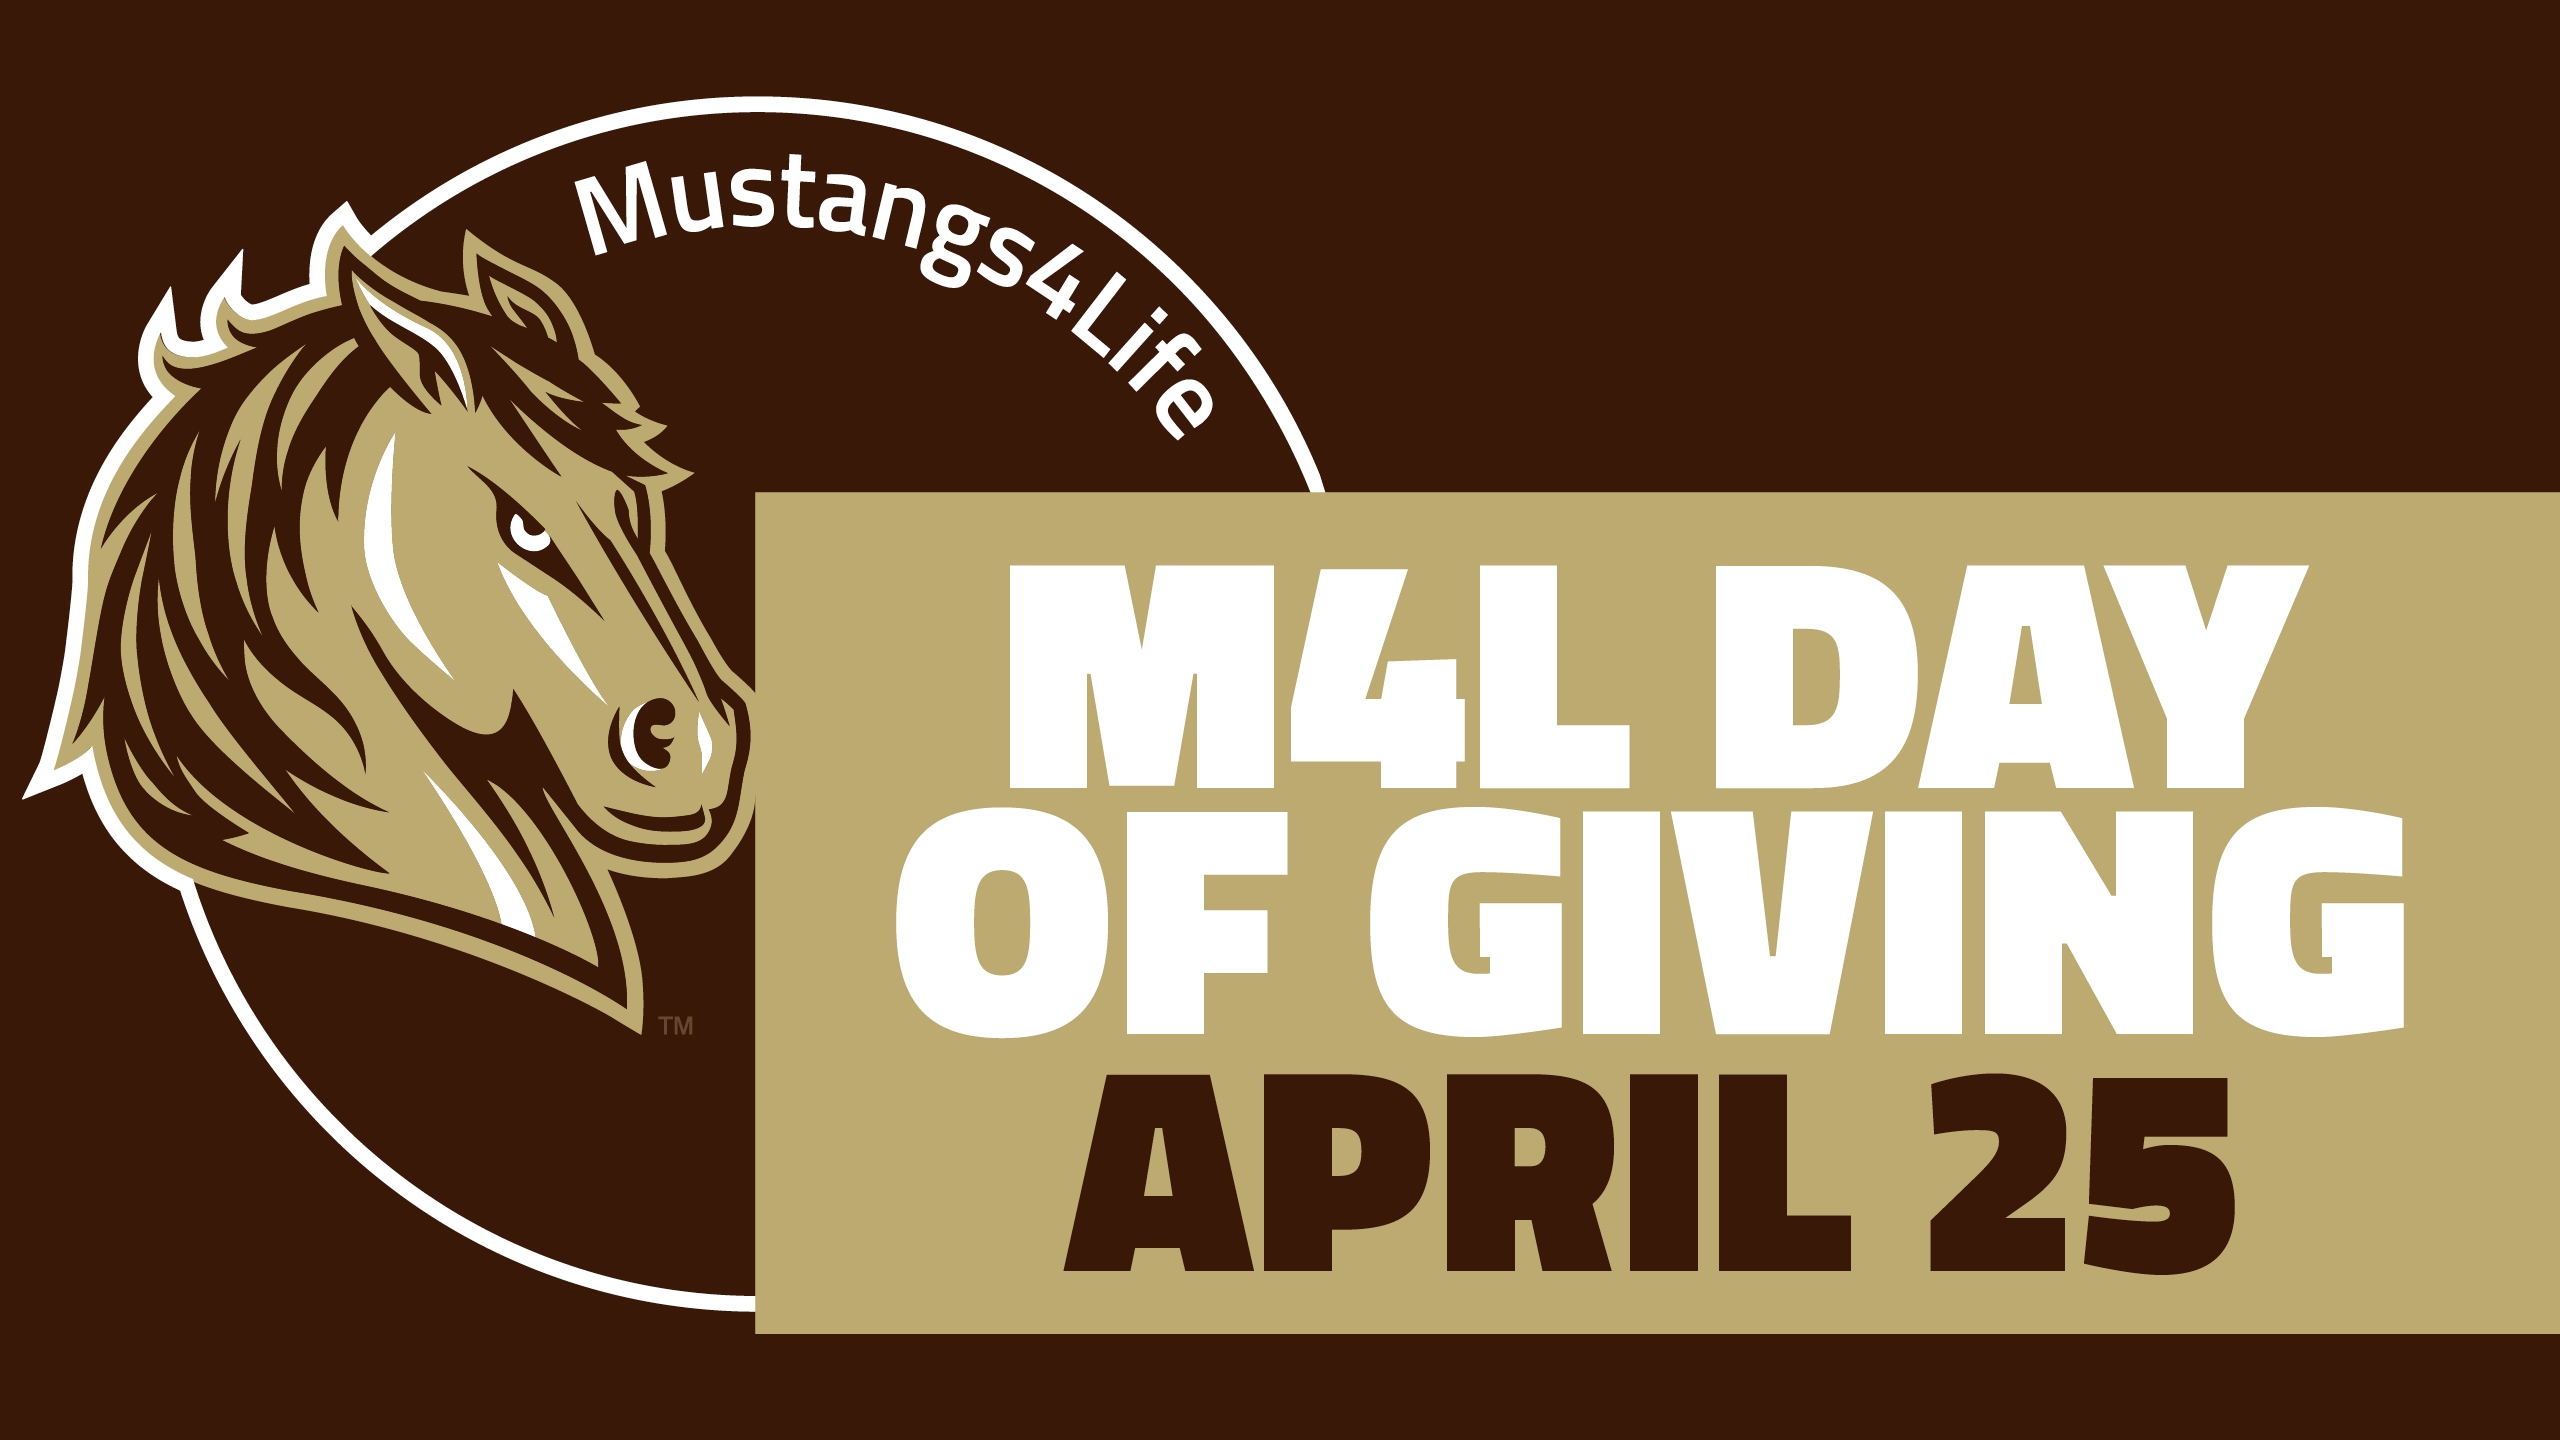 3rd Annual M4L Day of Giving is April 25 Article Photo